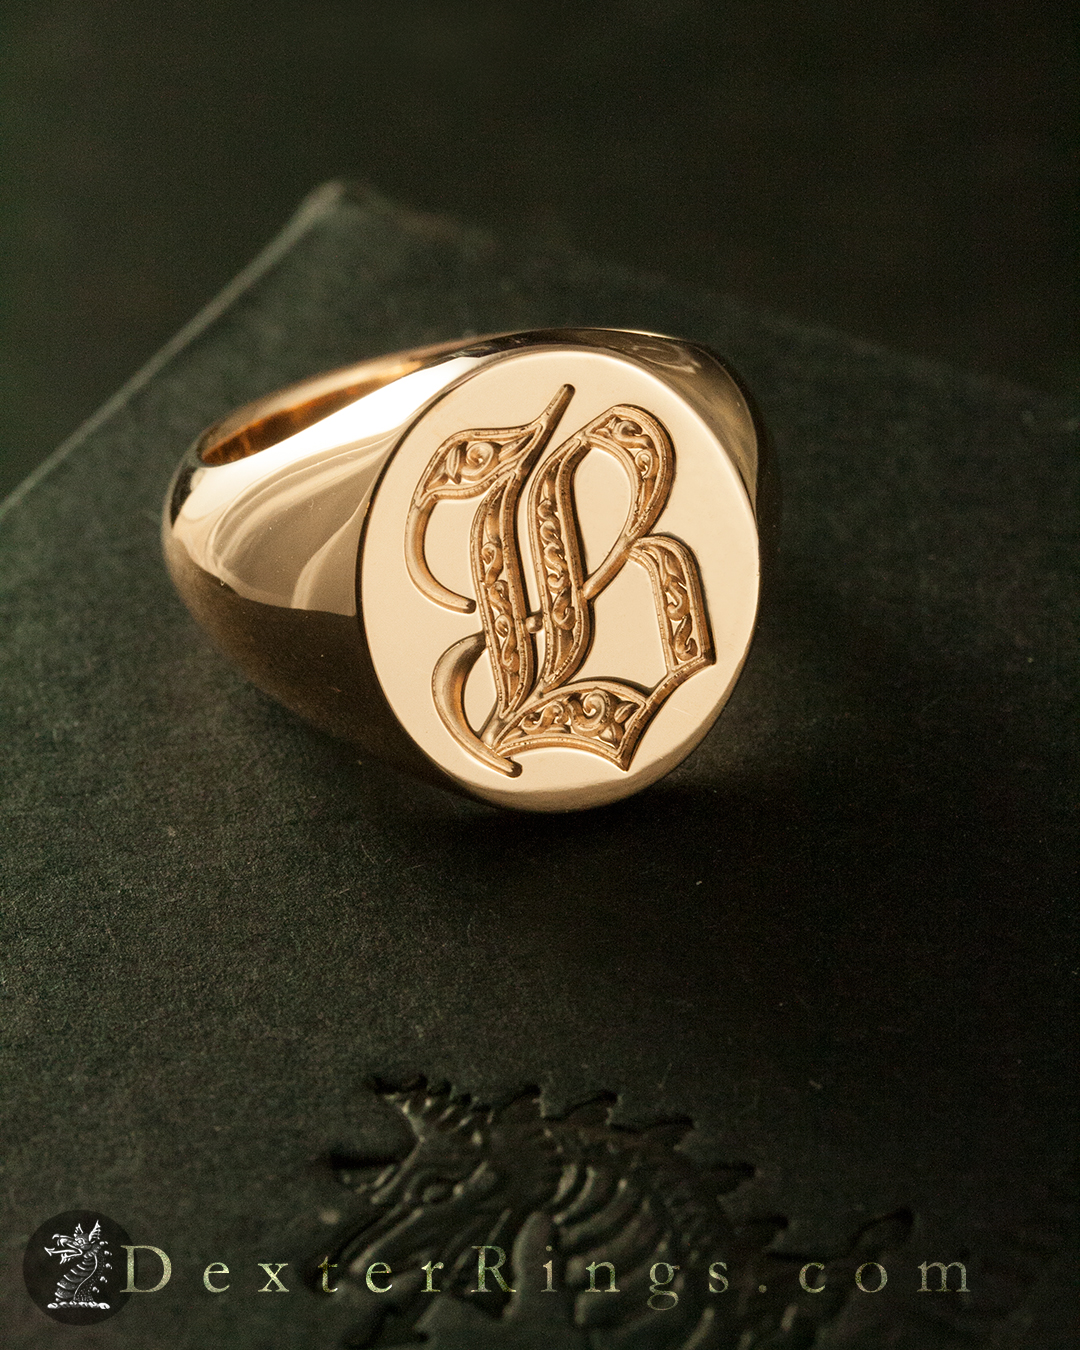 Buy Large Oval Signet Ring With Engraved Personalized Initials in